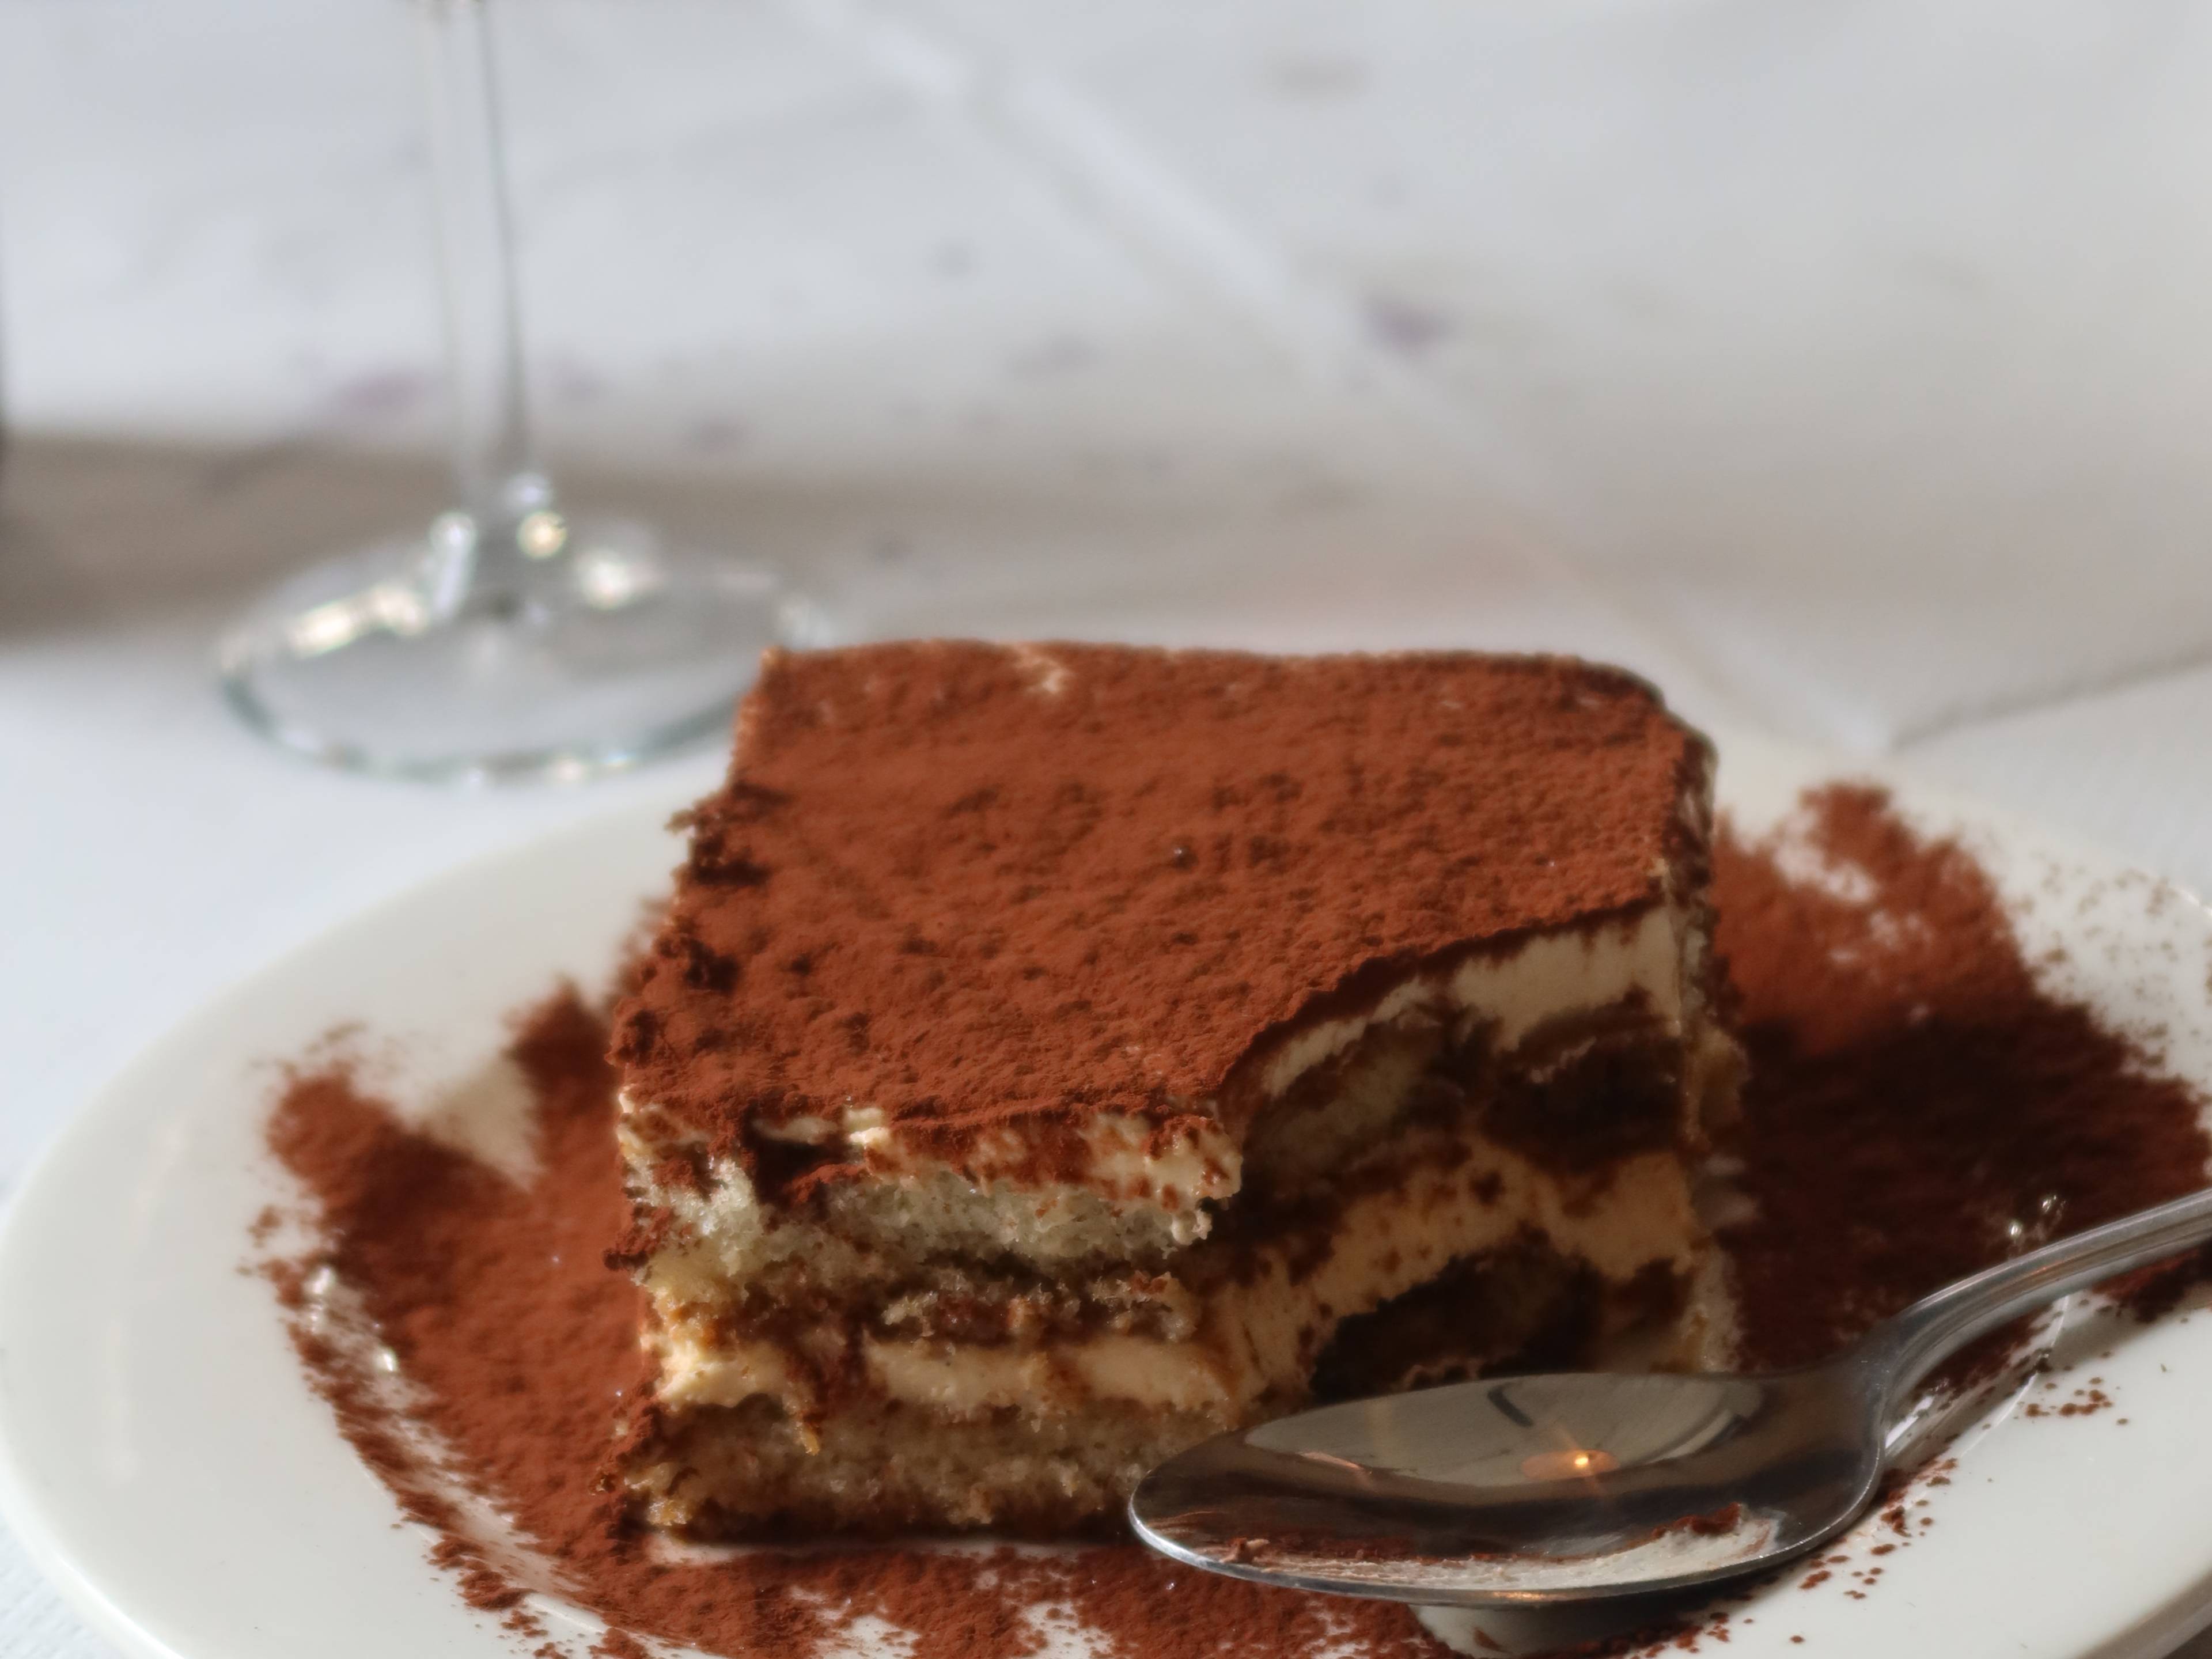 Tiramisu on a white plate, with a glass of red wine in the background.